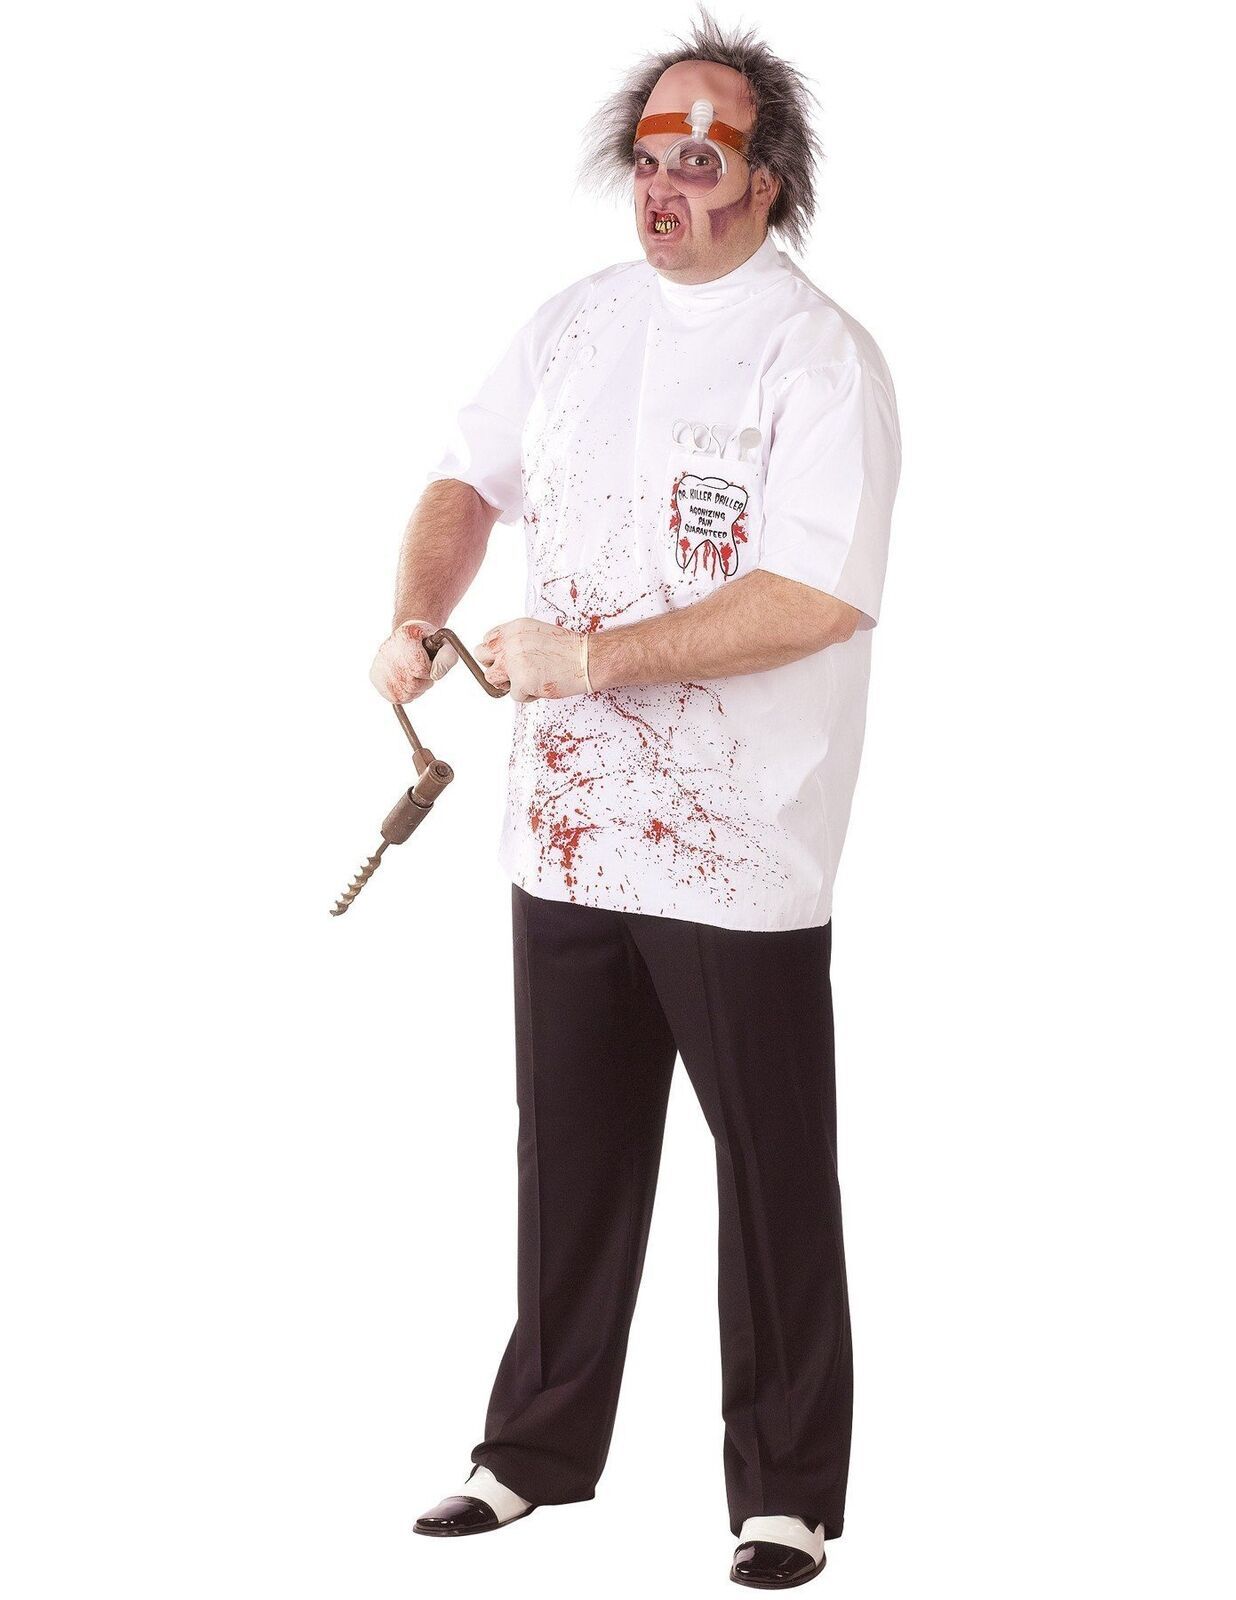 Primary image for Fun World - Dr. Killer Driller -  Plus Size Adult Costume - White/Red - Dentist